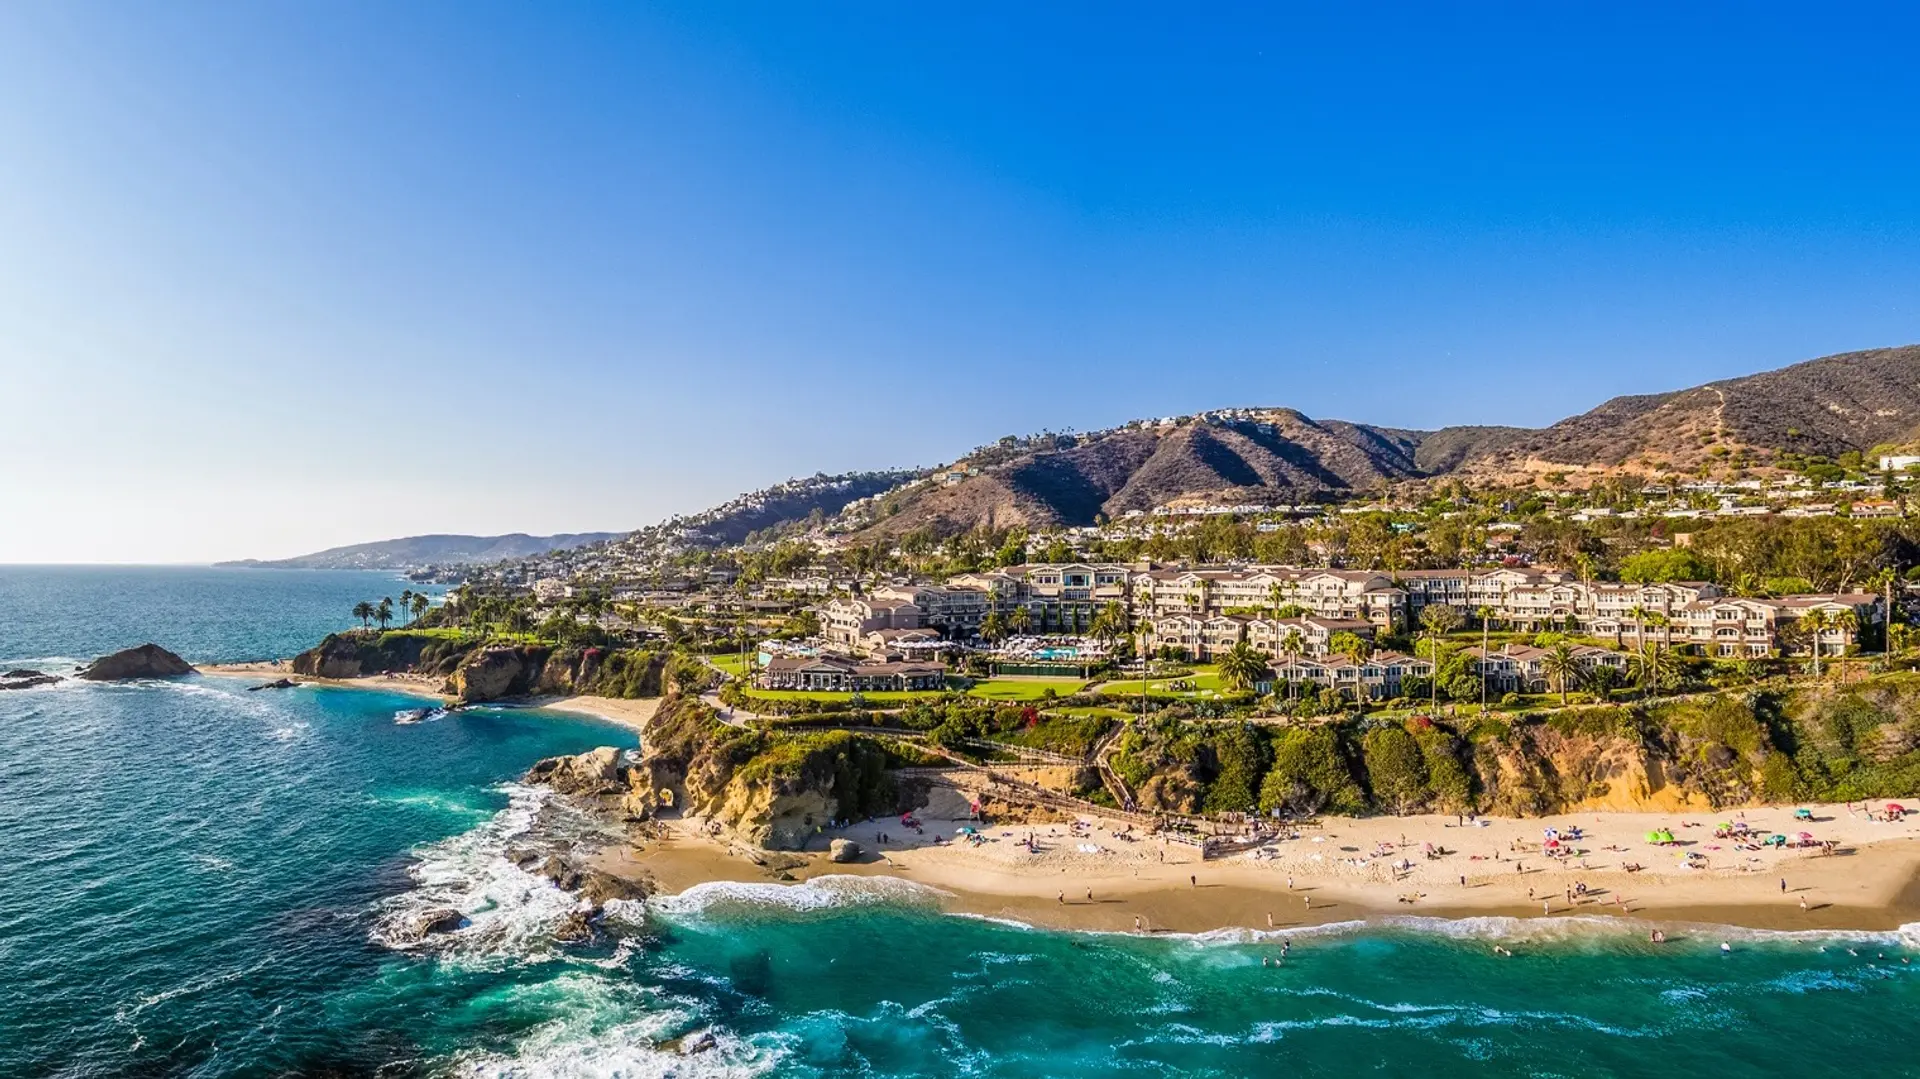 Hotels Articles - The Best Luxury Hotels in California